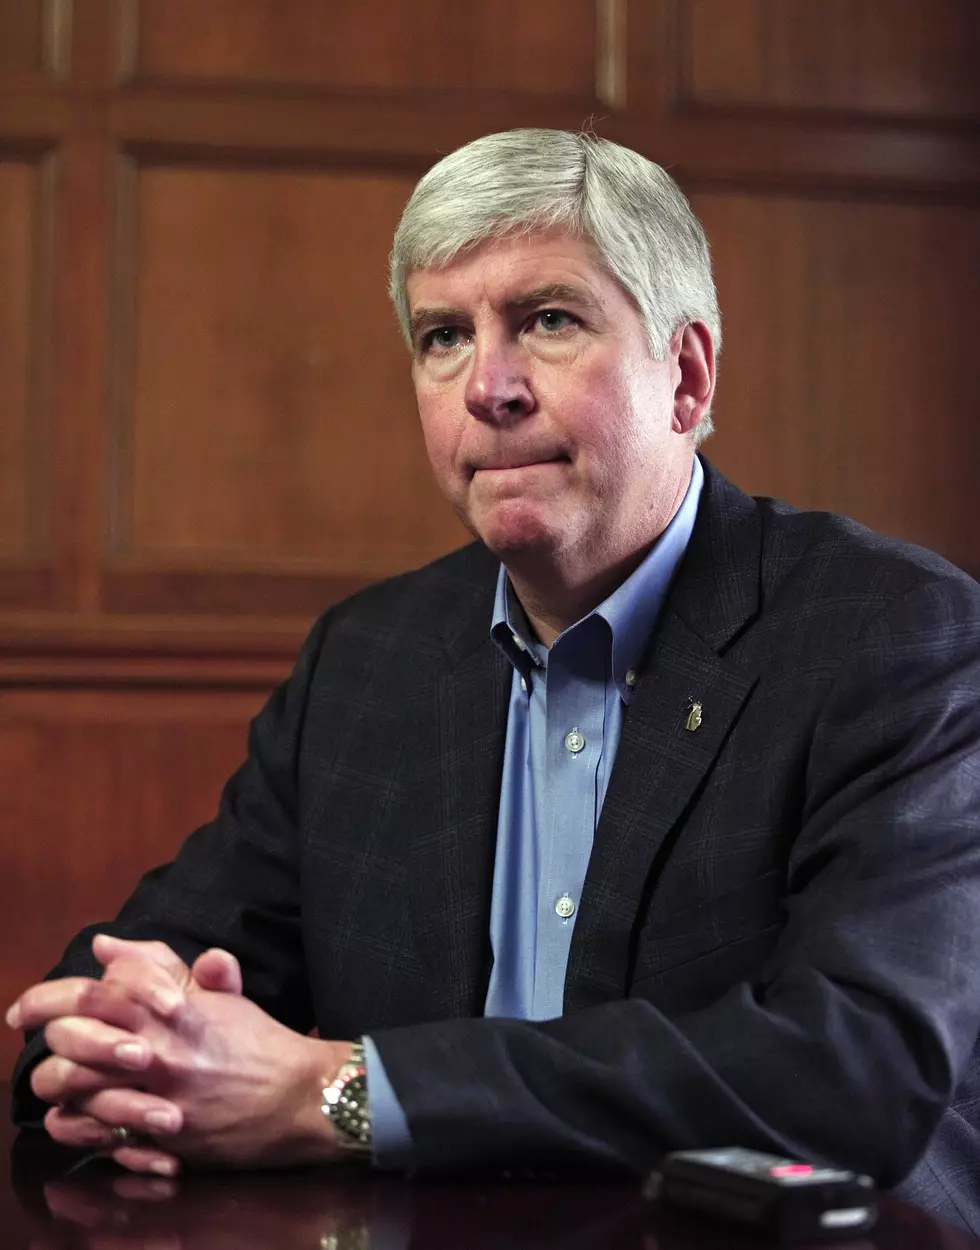 New Poll Shows Snyder Losing Ground